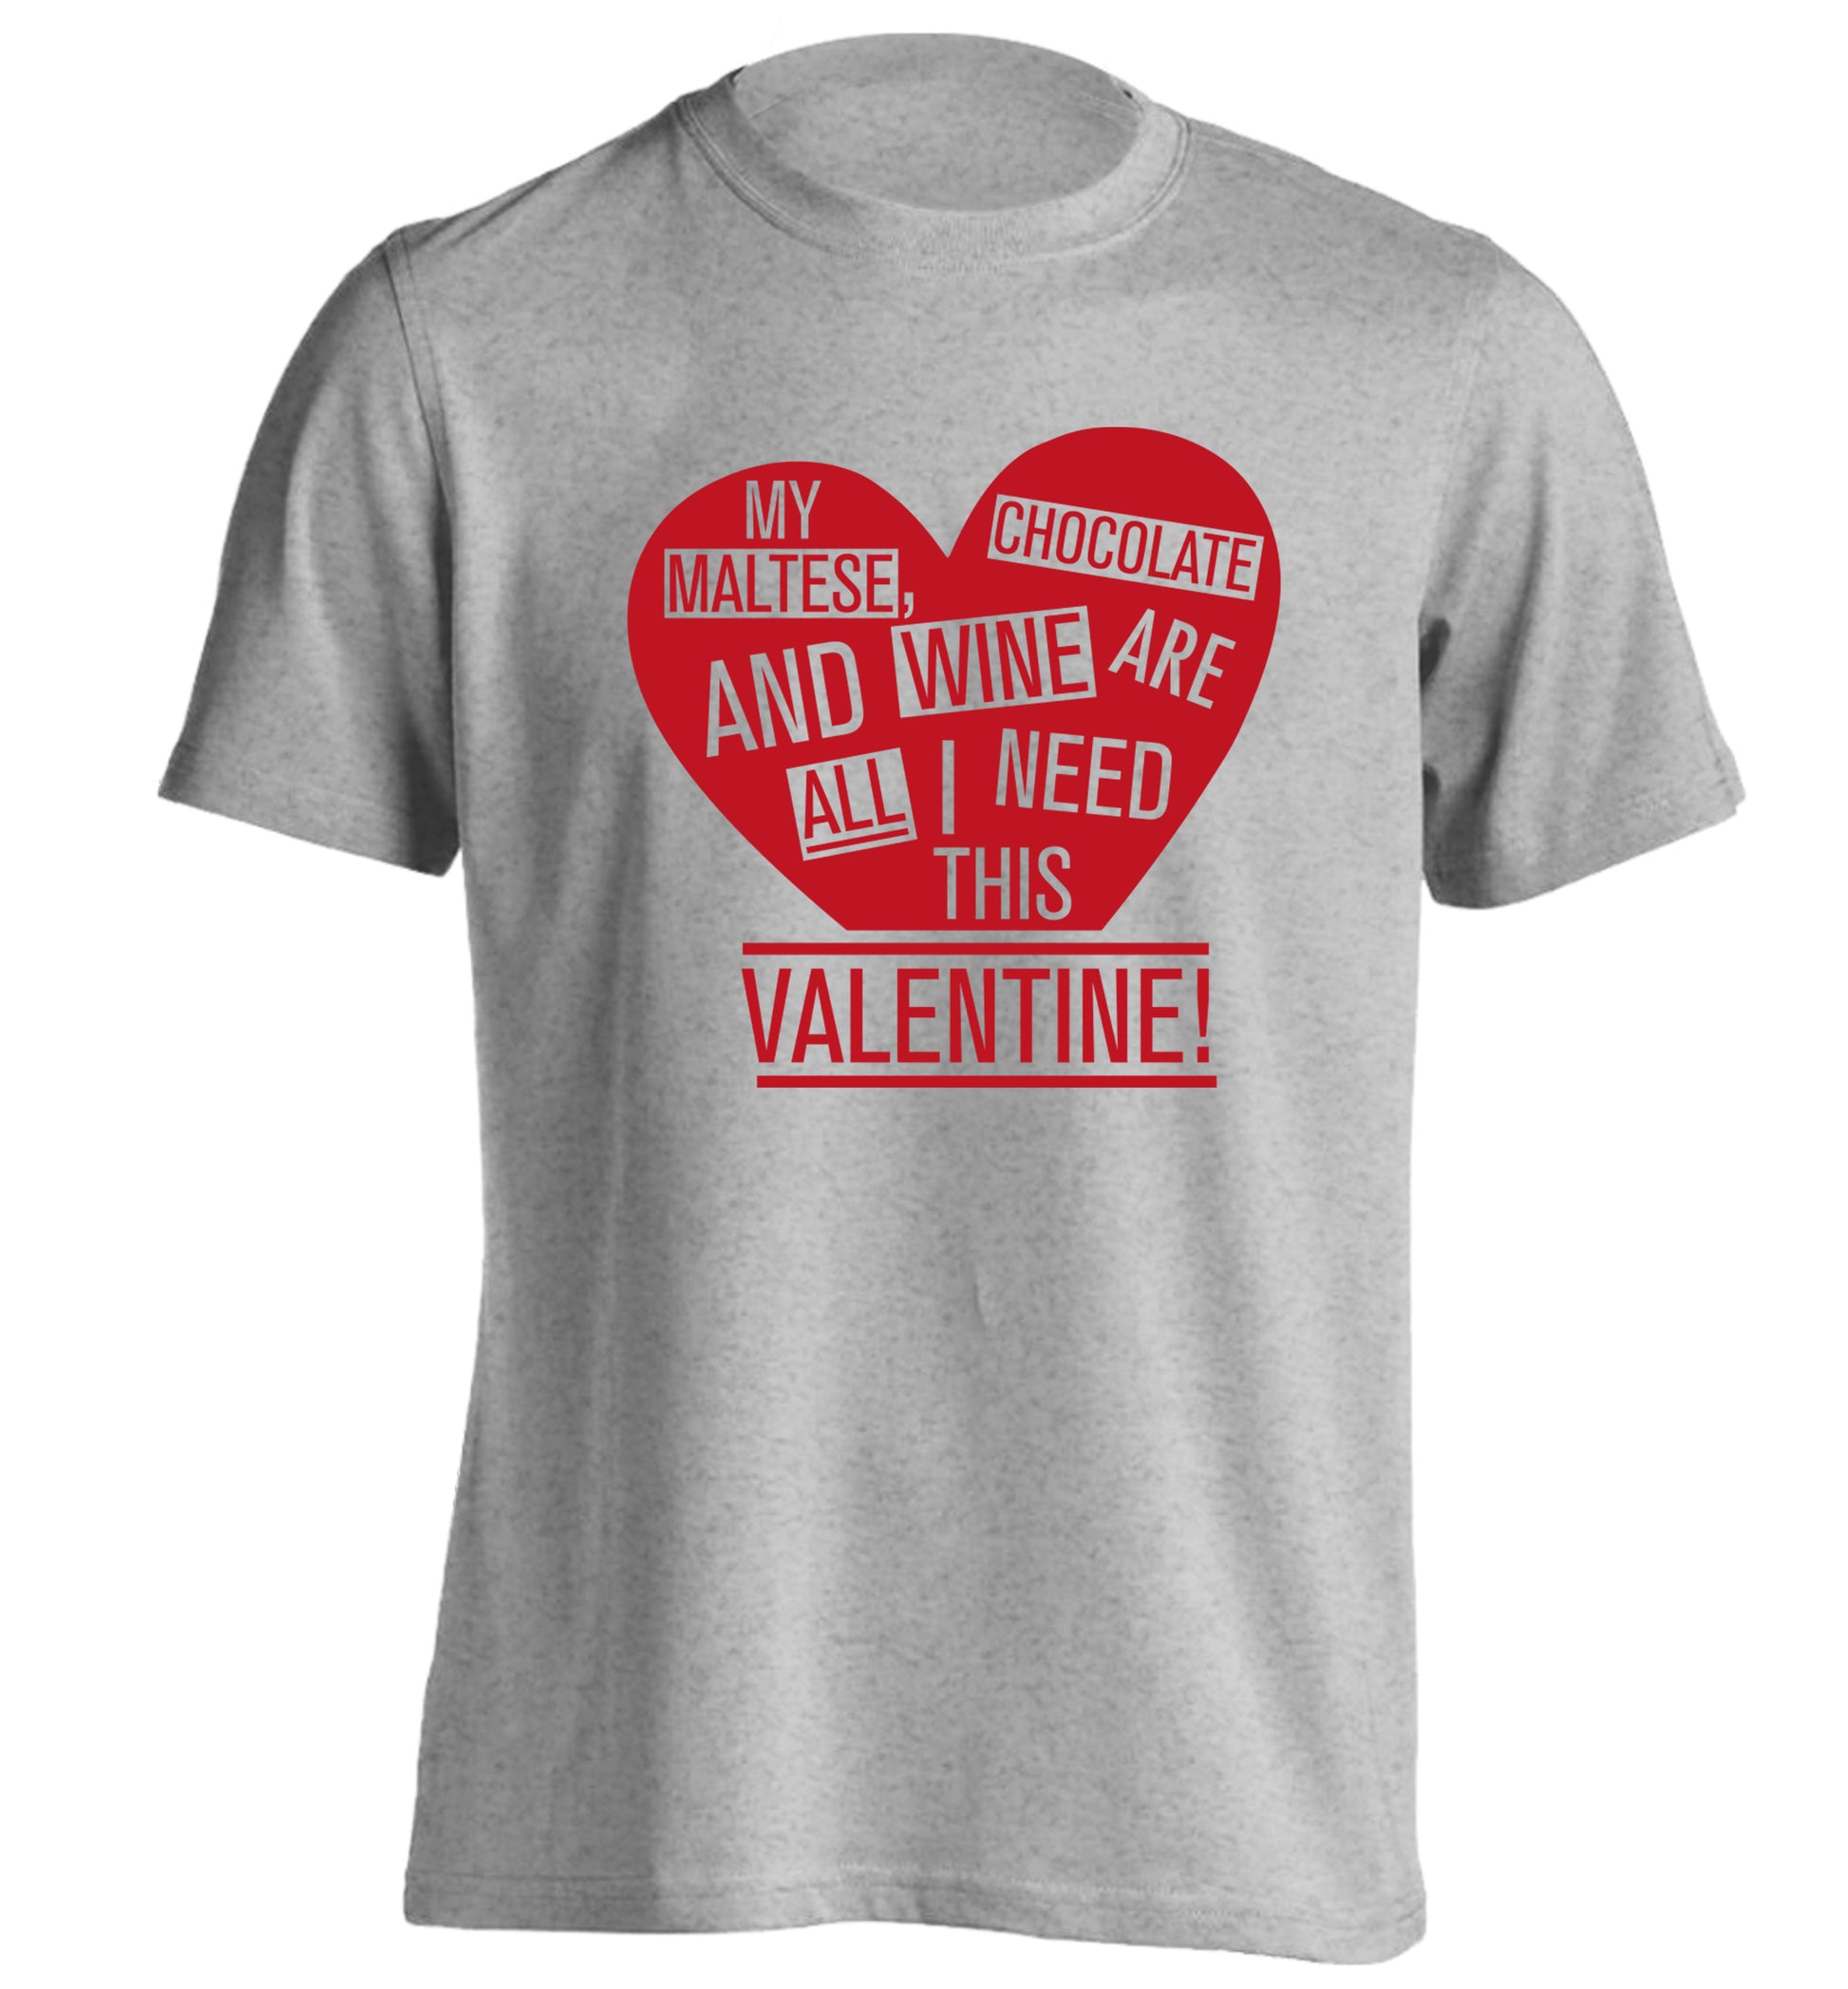 My maltese, chocolate and wine are all I need this valentine! adults unisex grey Tshirt 2XL